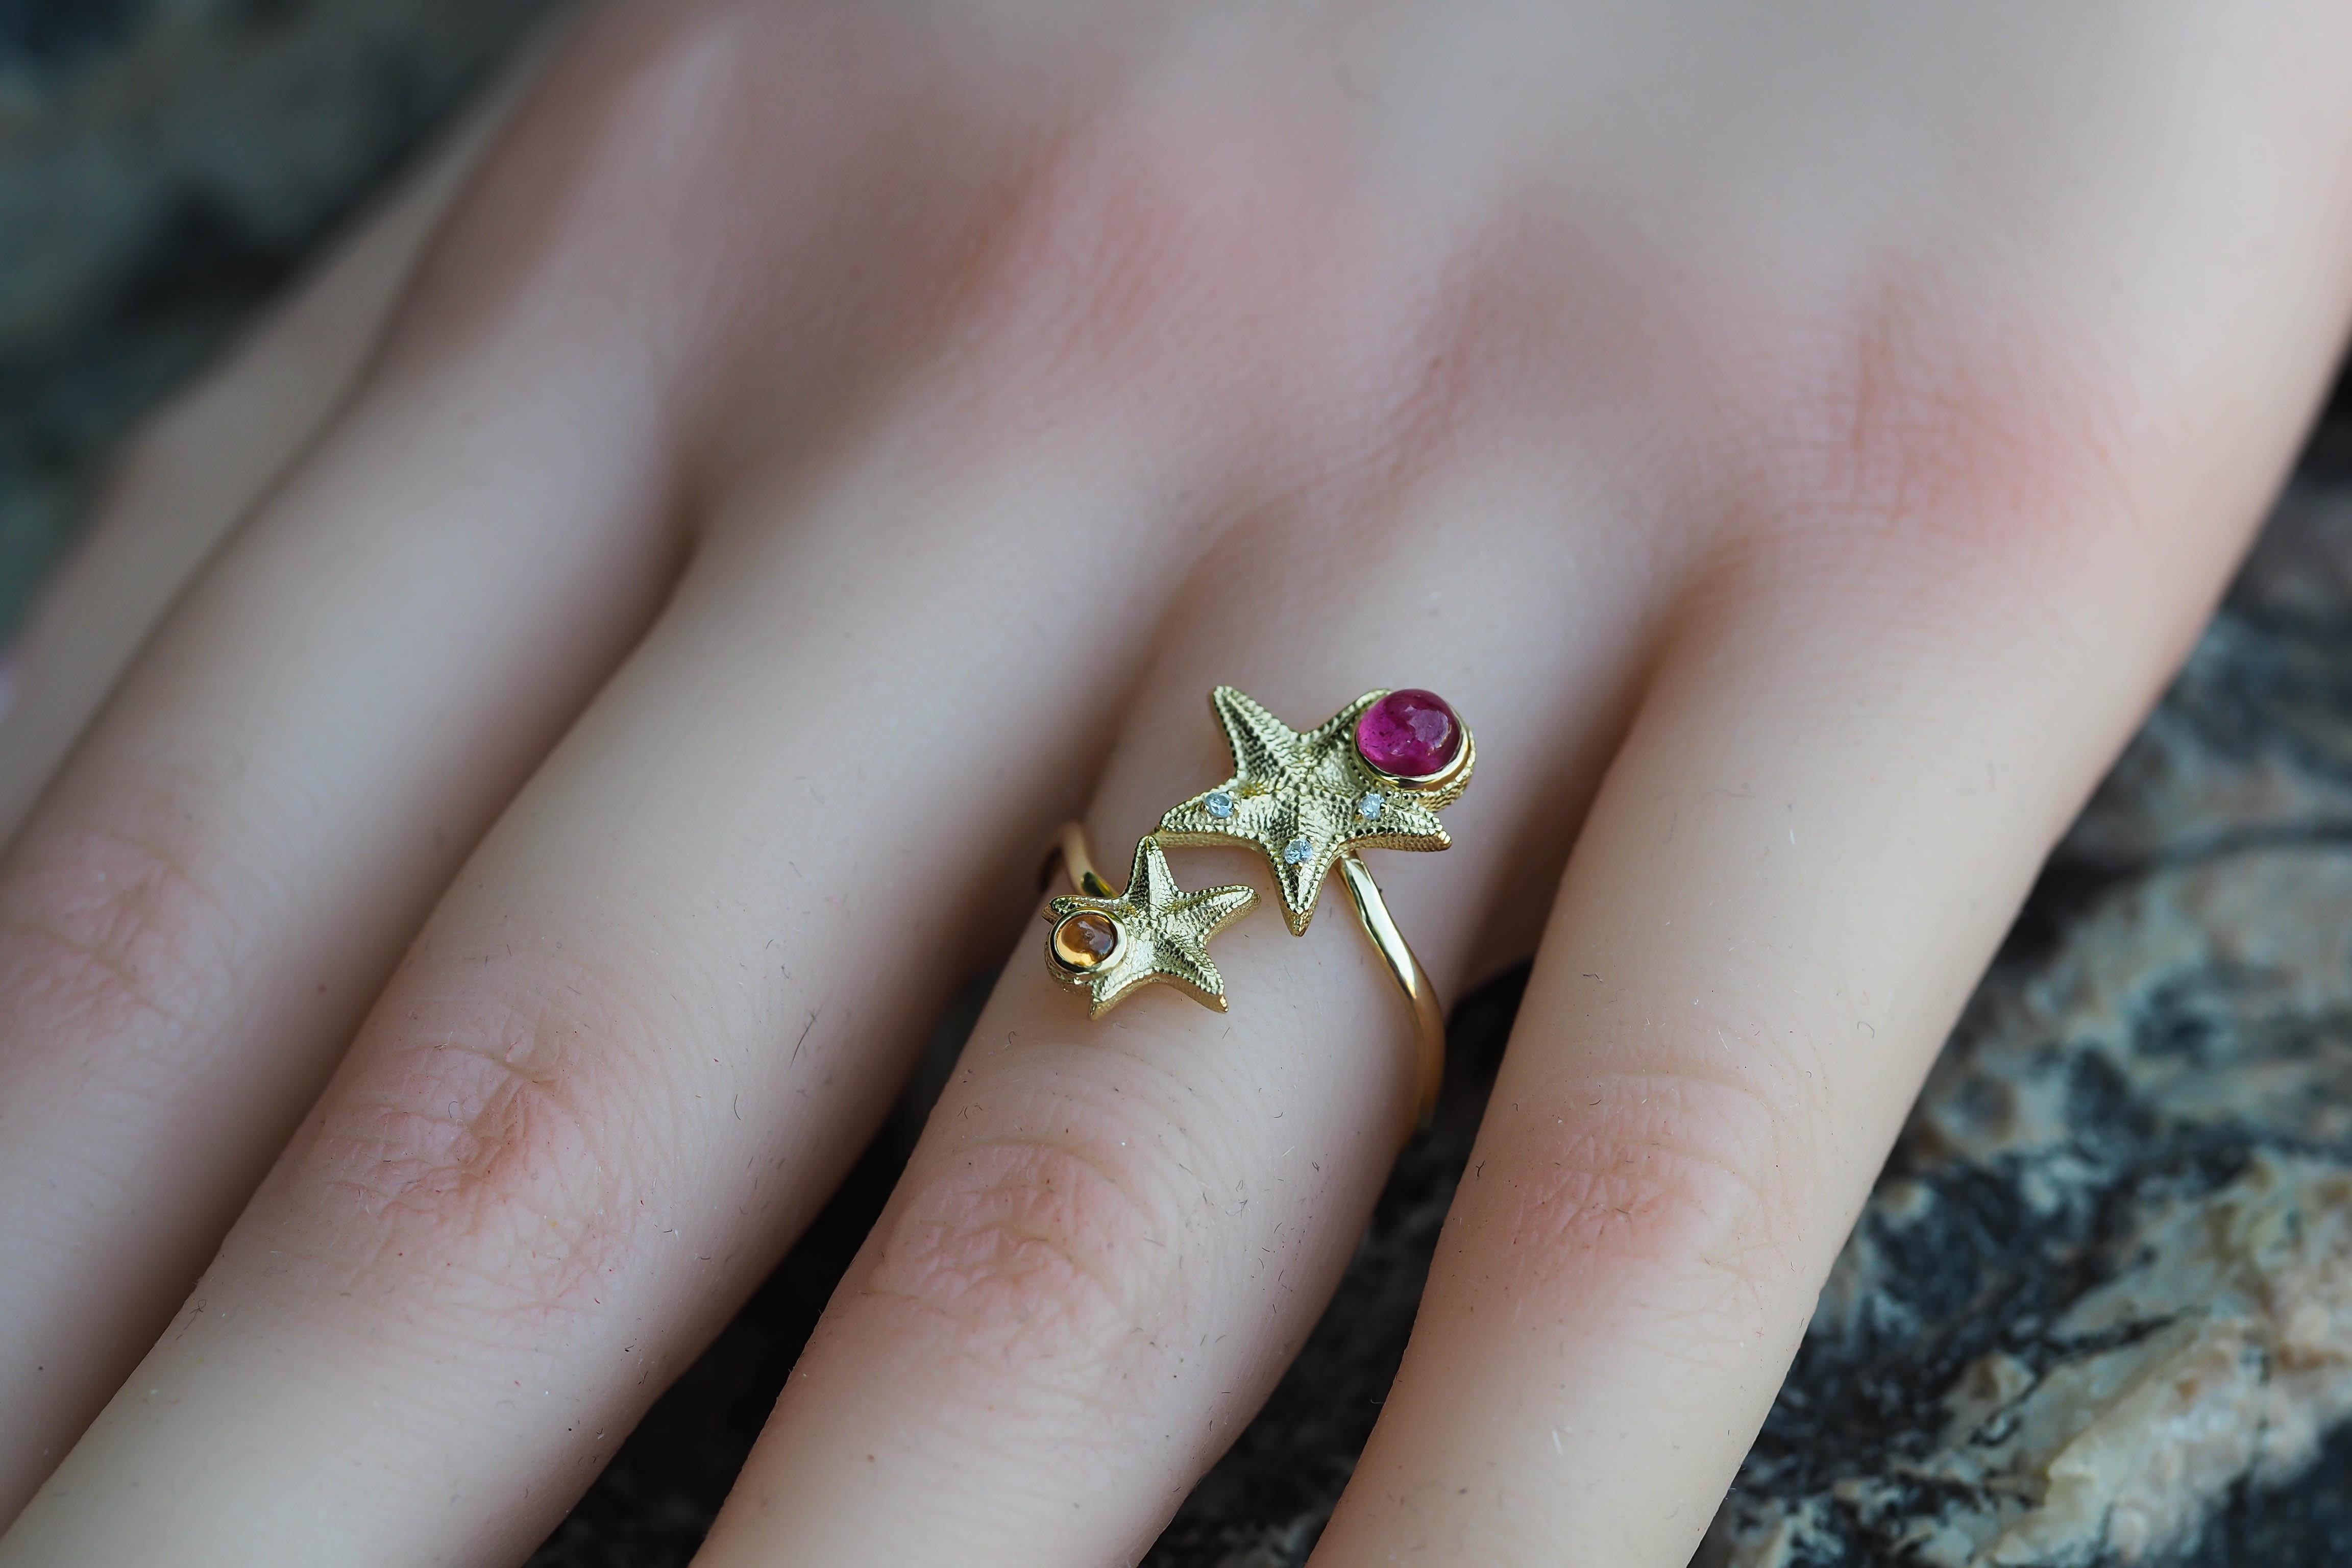 For Sale:   Ruby and Sapphire cabochon ring in 14 karat gold.  Star Fish Ring! 9